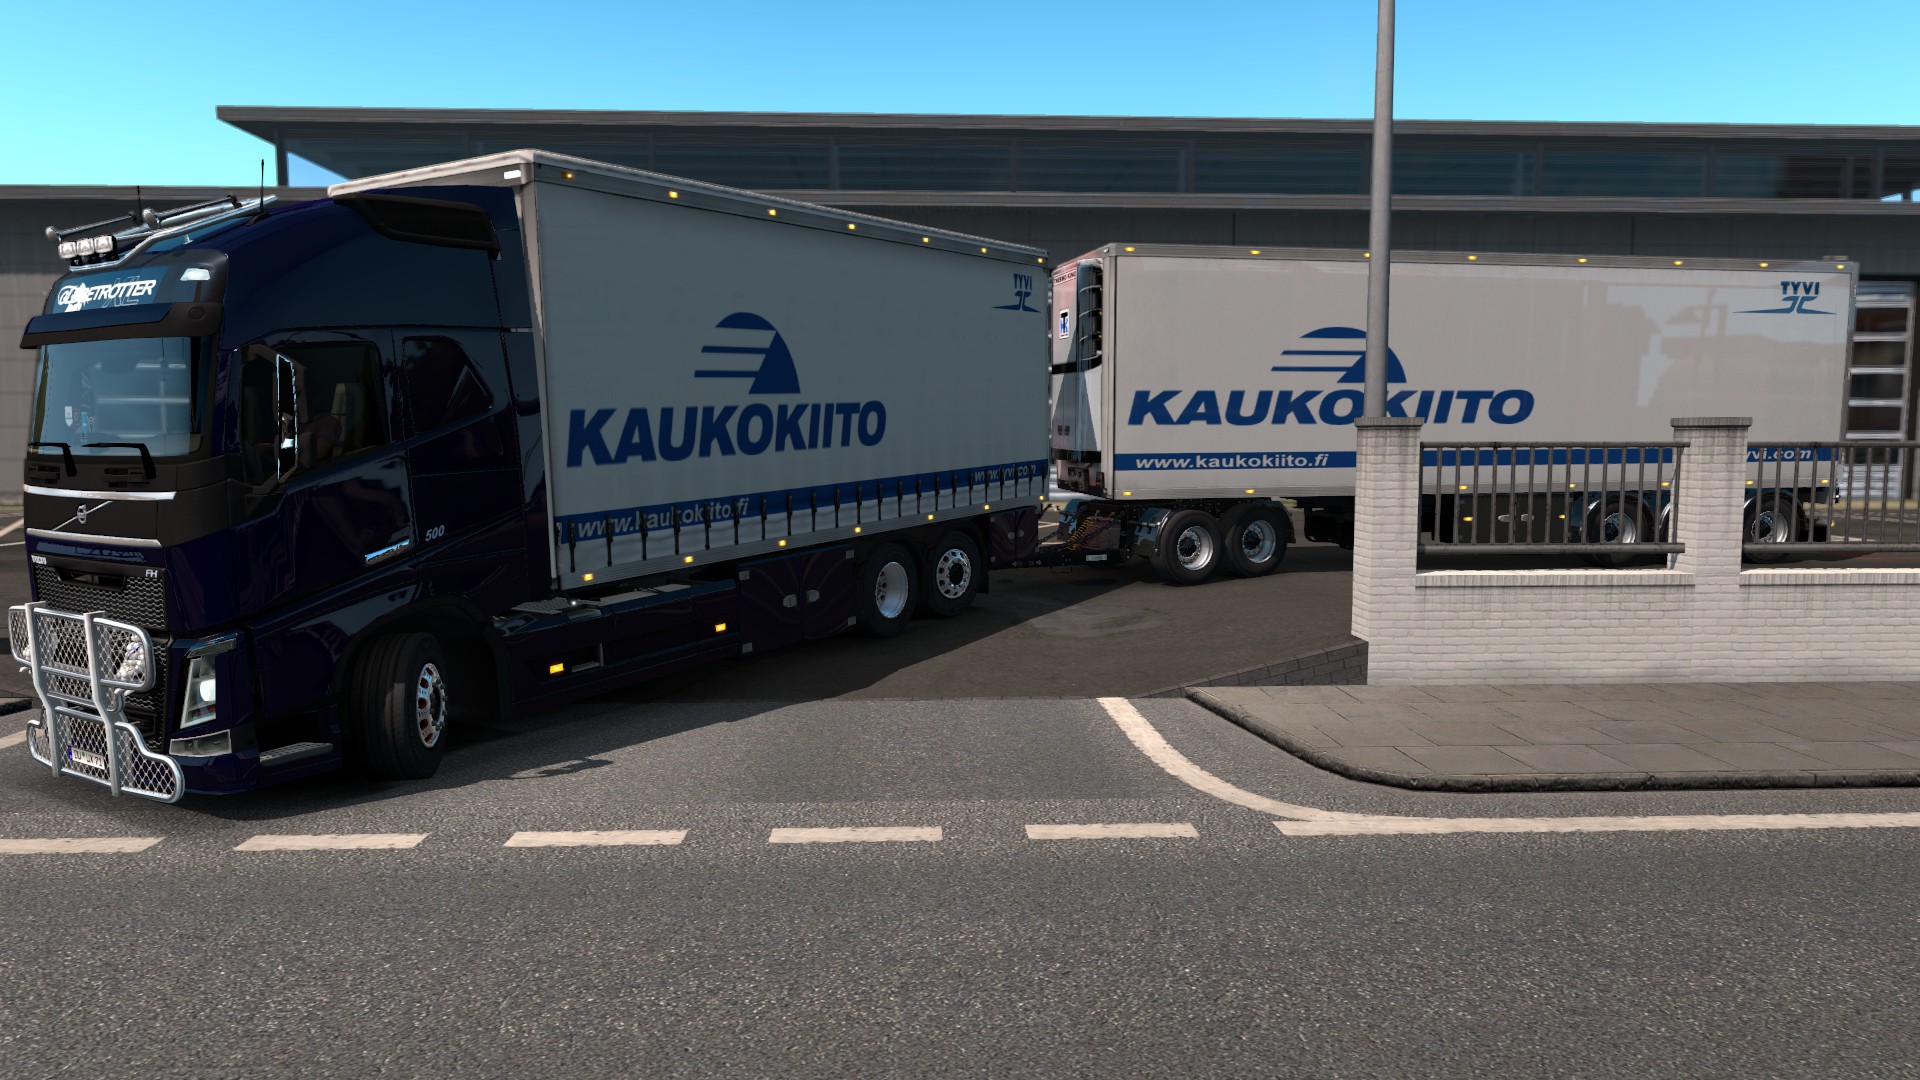 Steam Community :: Screenshot :: RJL Sisu and Flemming V's tandem mods  combined with Kacperth Kaukokiito skin. Exellent and thanks!